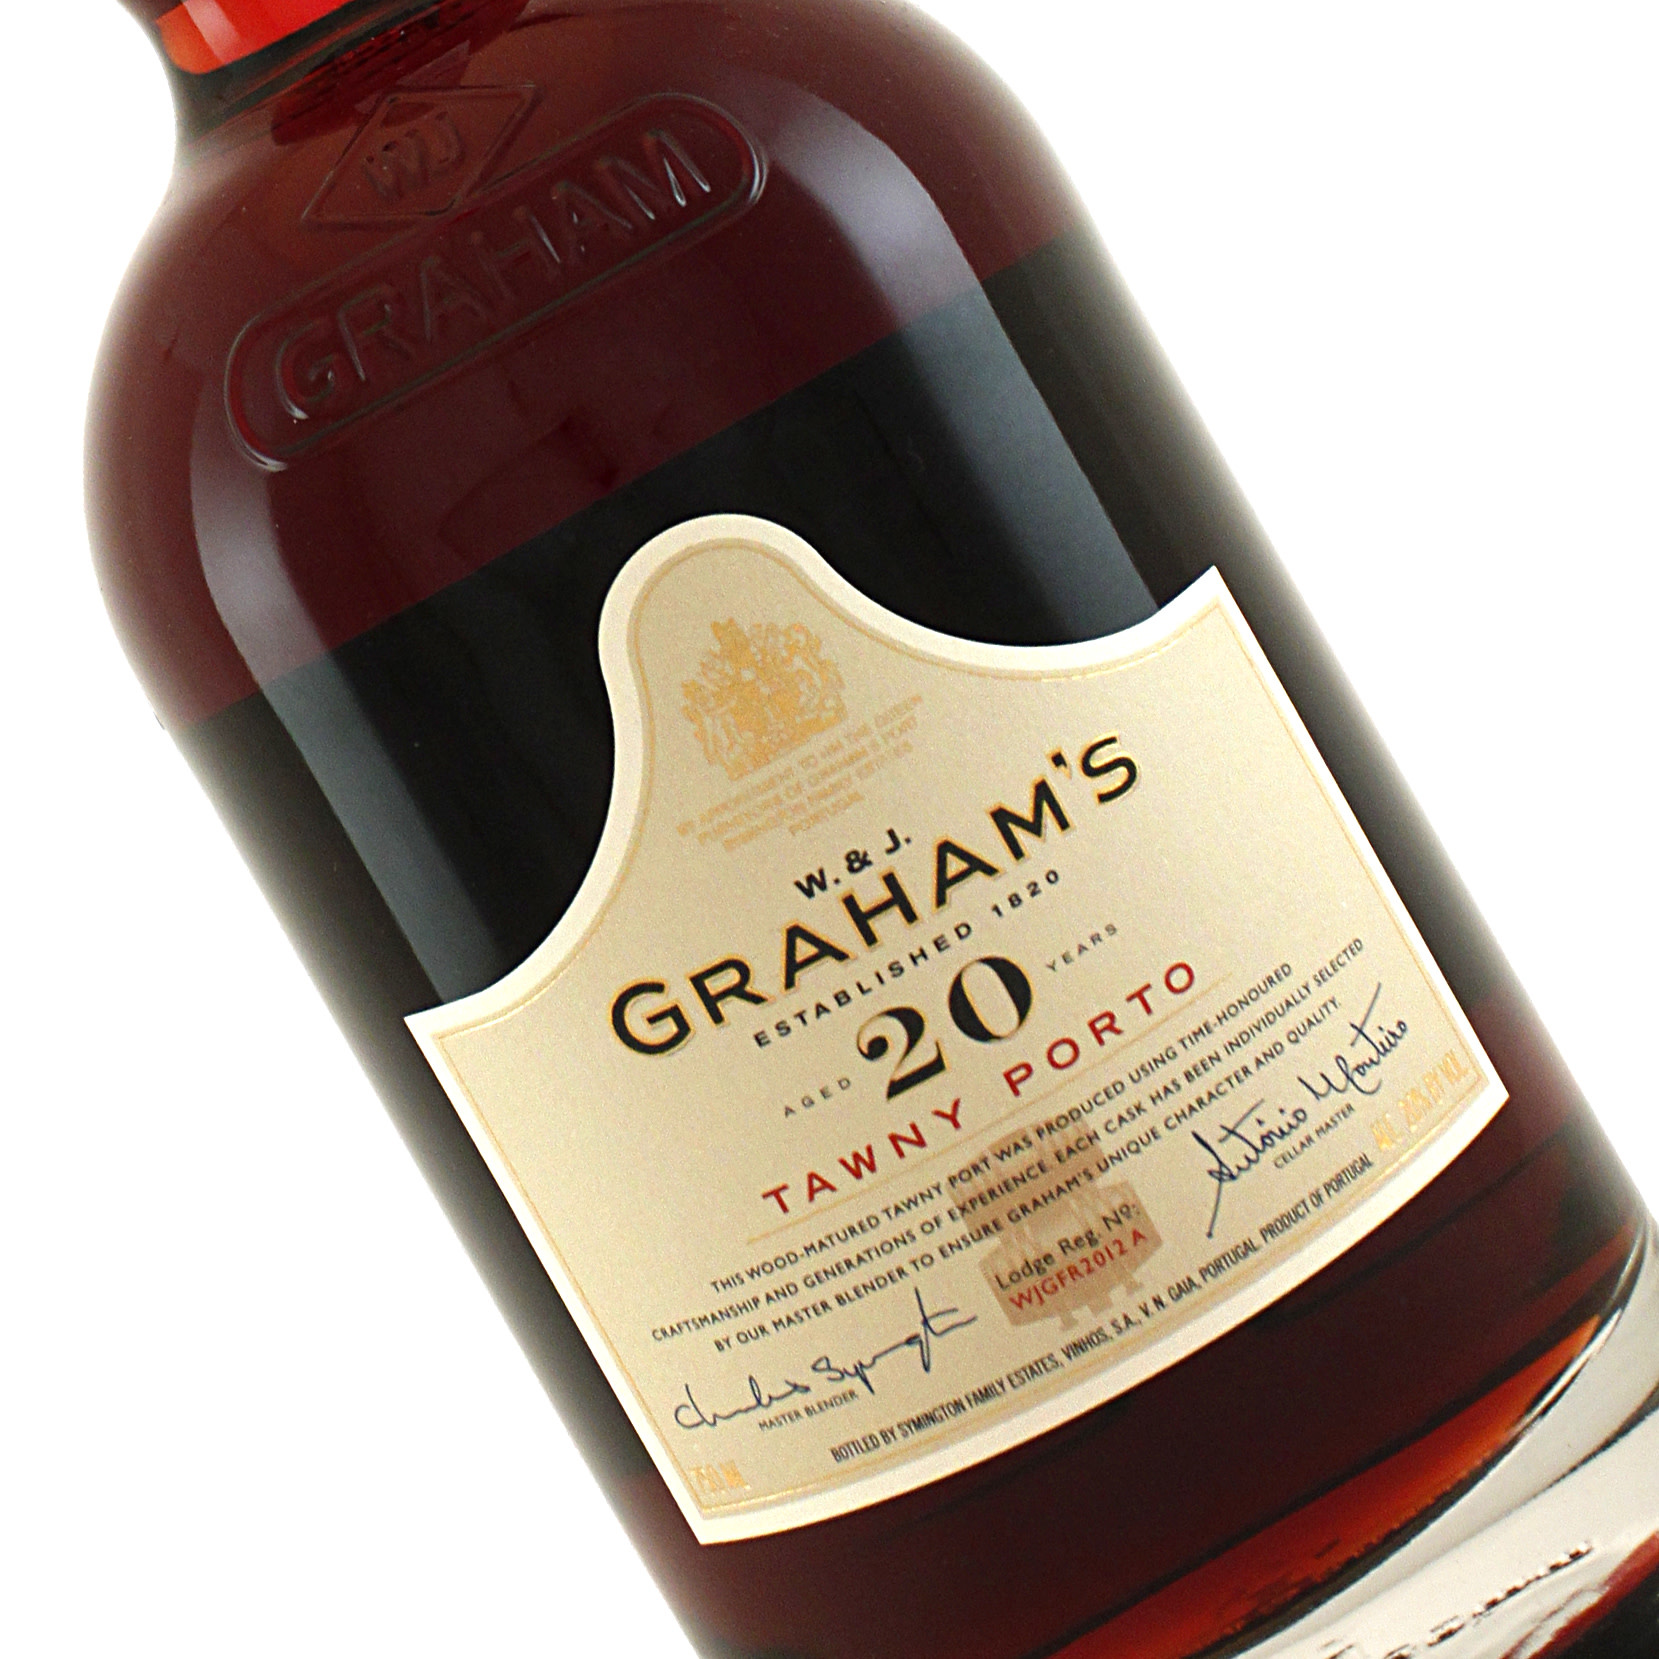 Graham's Tawny Port 20 Year Old, Porto, Portugal - Wine Country